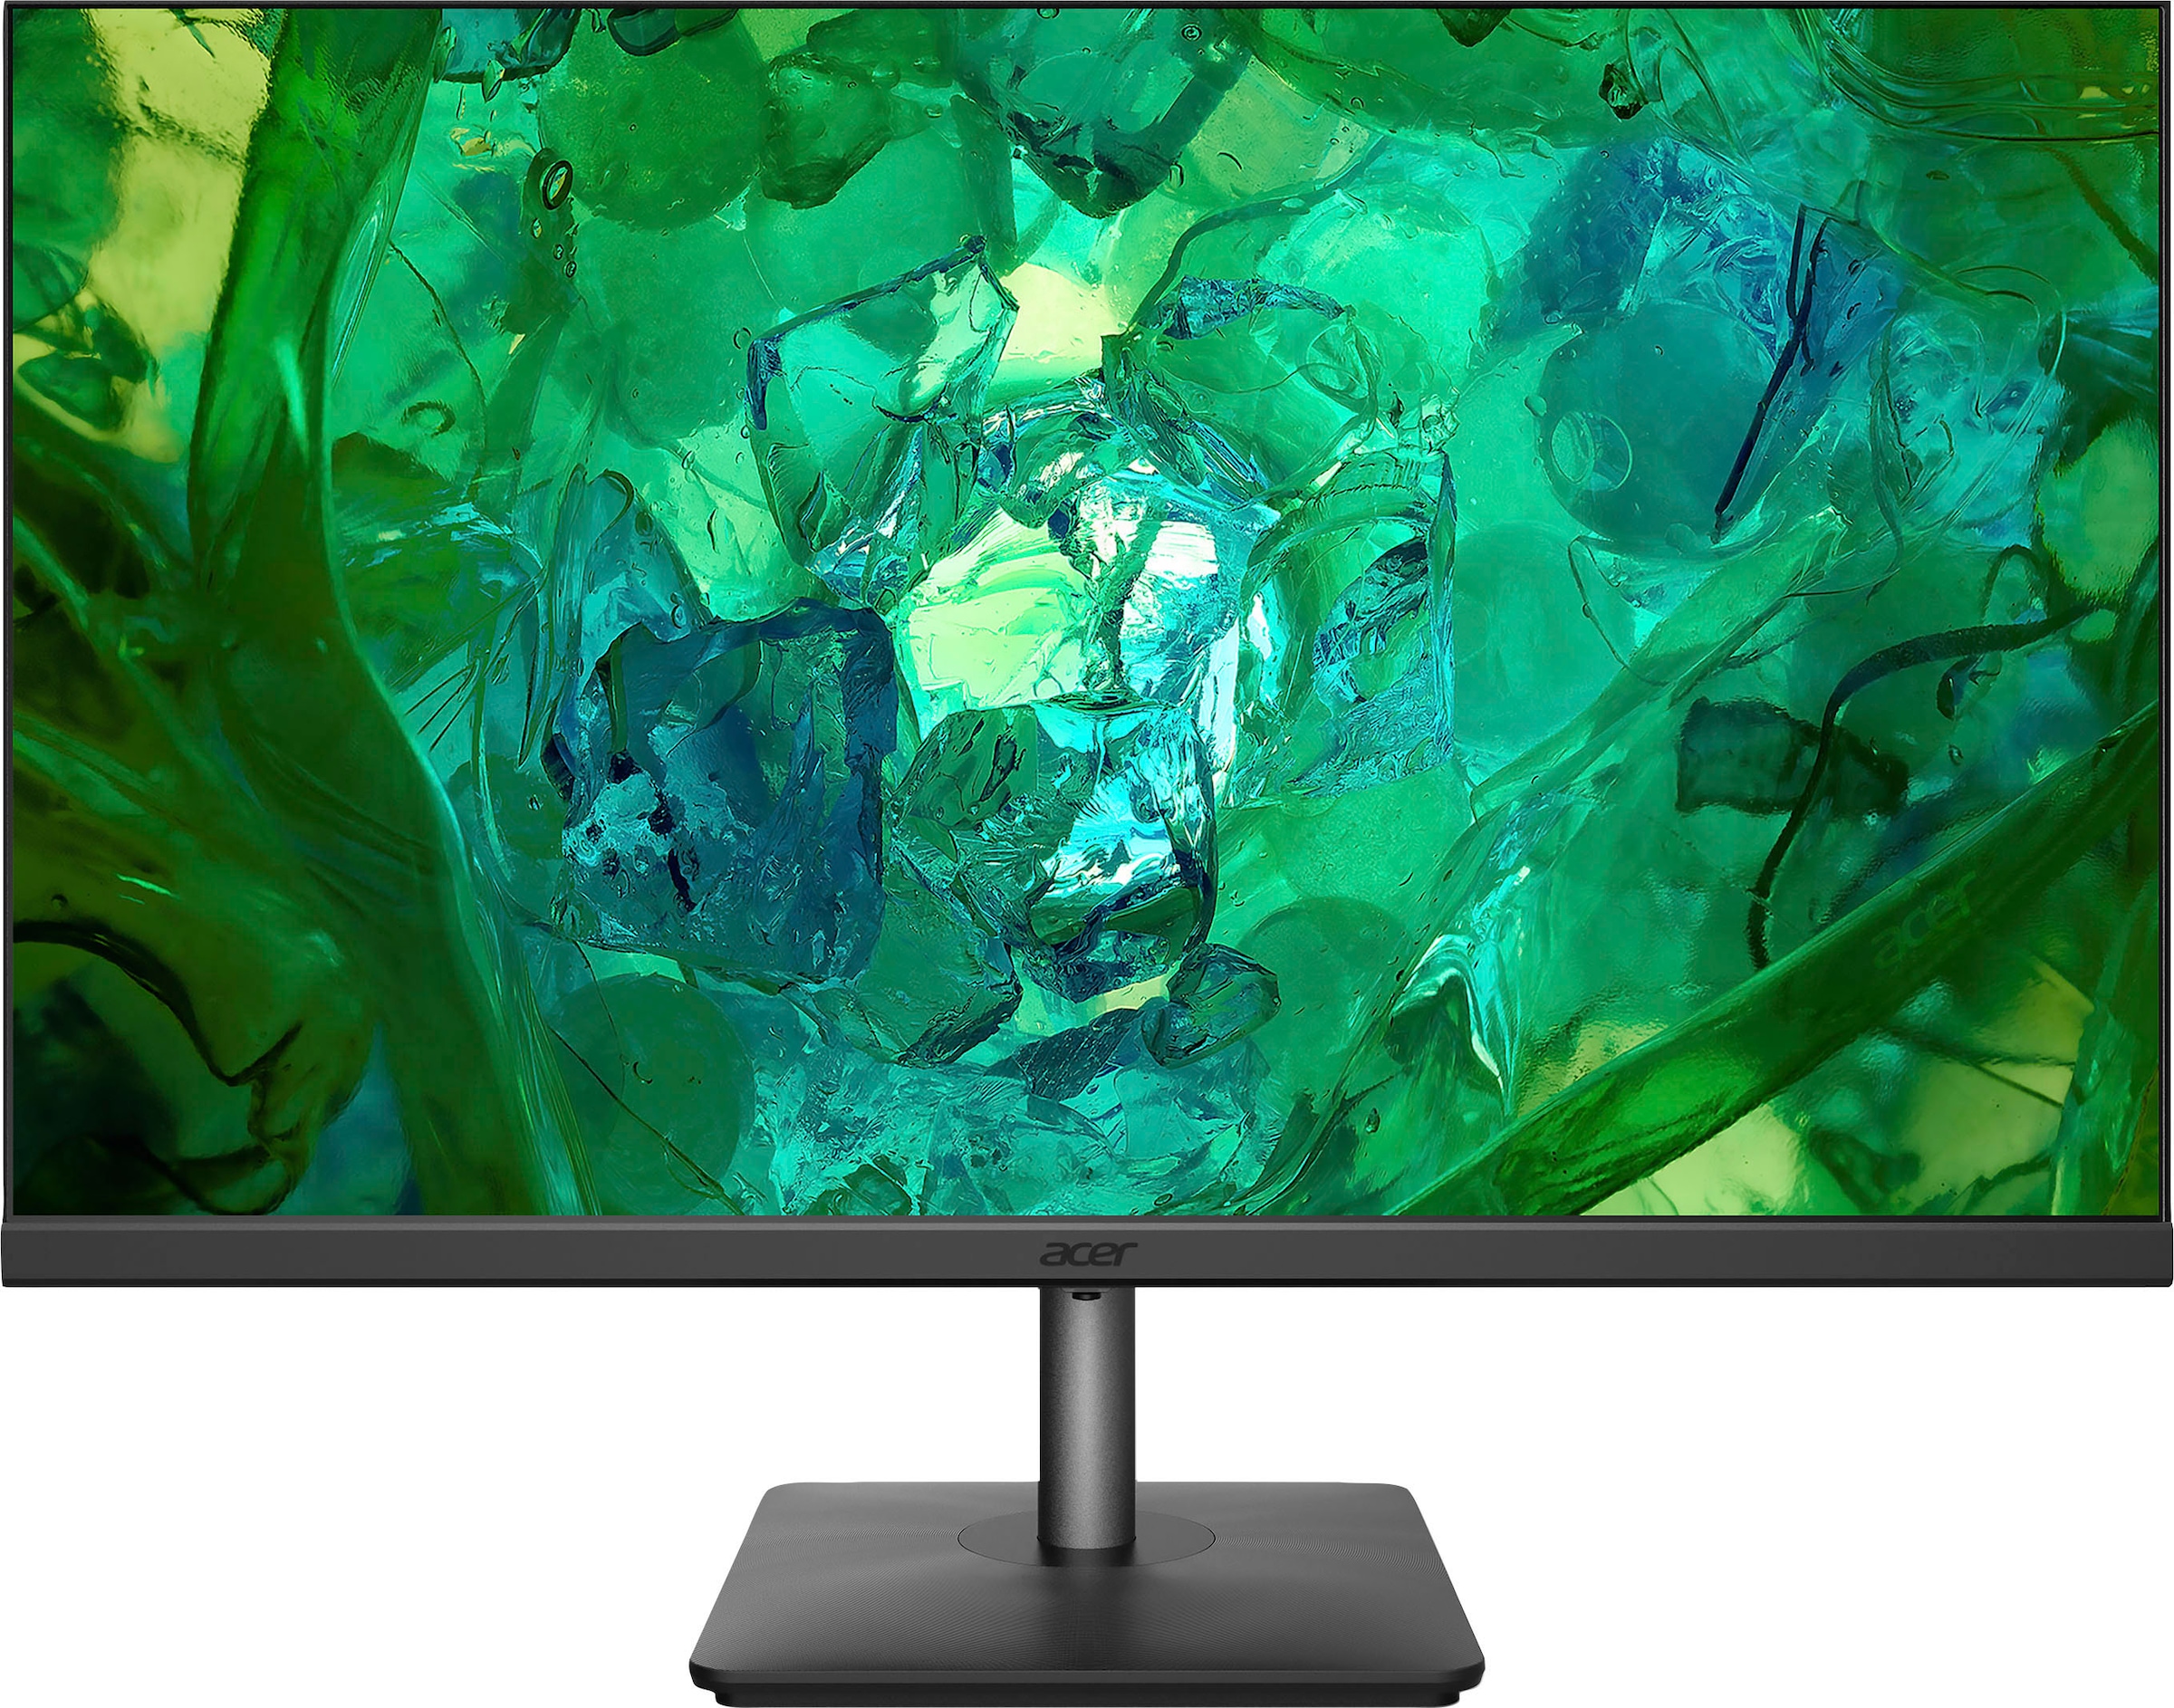 Acer LED-Monitor »Vero RS242Y«, 61 cm/24 Zoll, 1920 x 1080 px, Full HD, 1 ms Reaktionszeit, 100 Hz